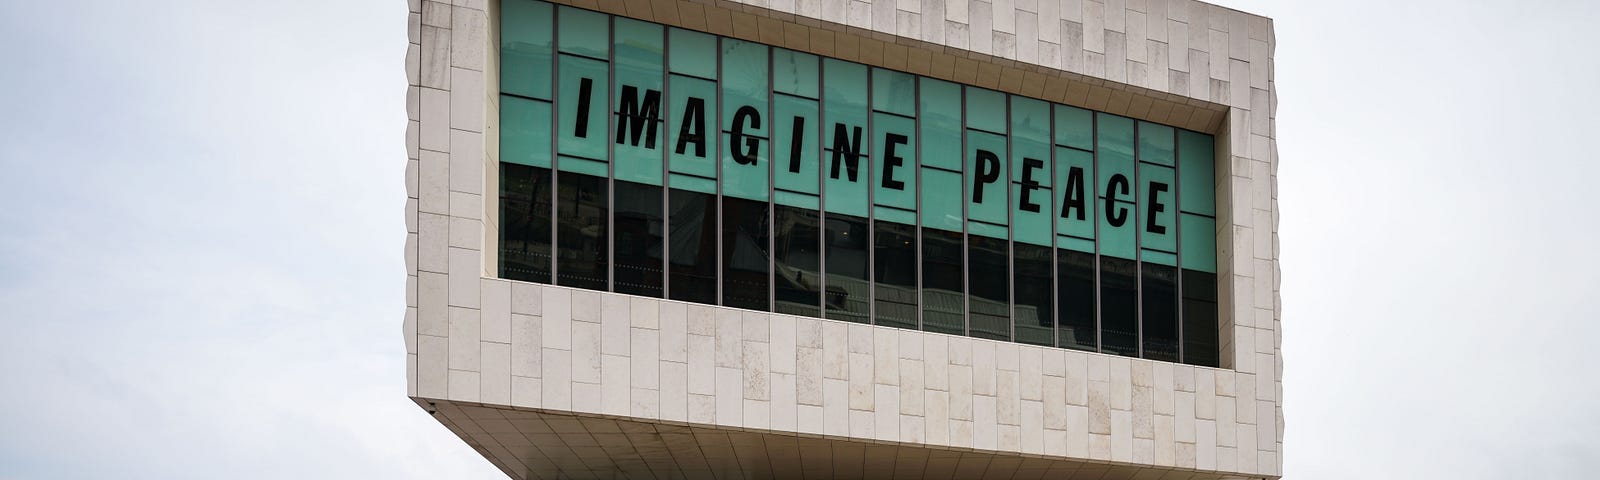 ‘Imagine Peace’ posted up in the windows of a large museum building.